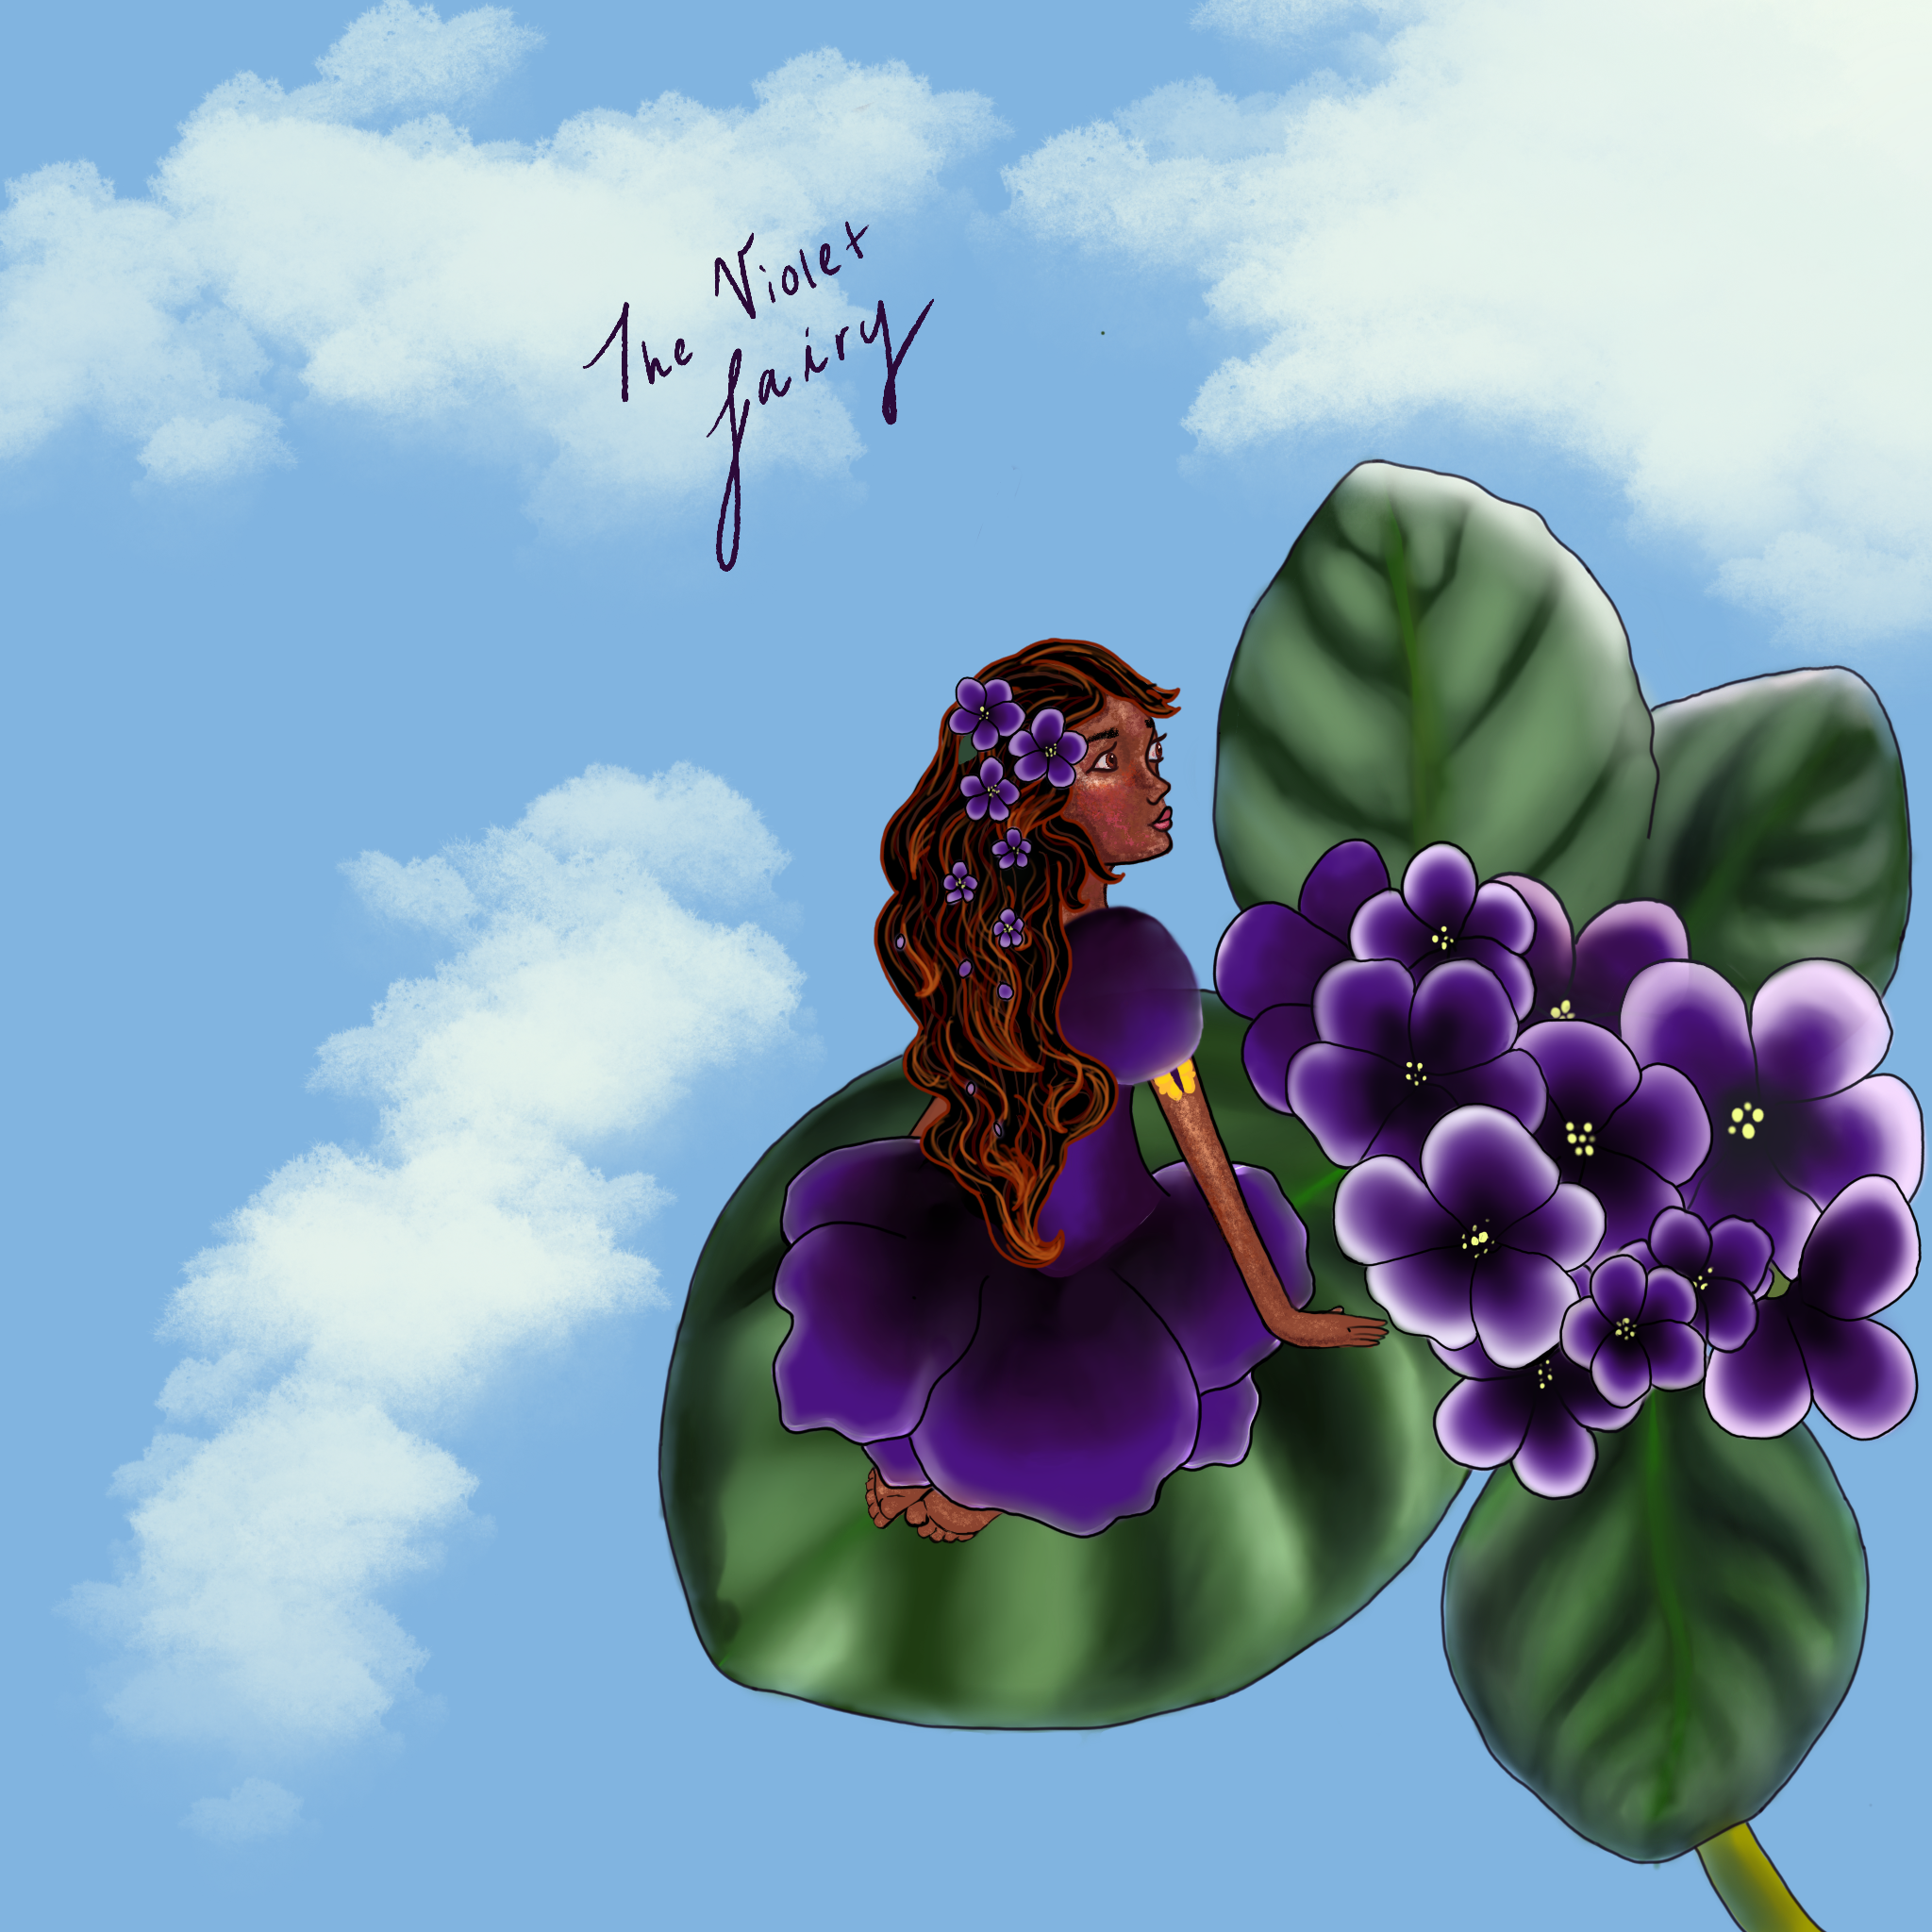 A fairy wearing a purple dress and purple flowers in her hair lays on a violet